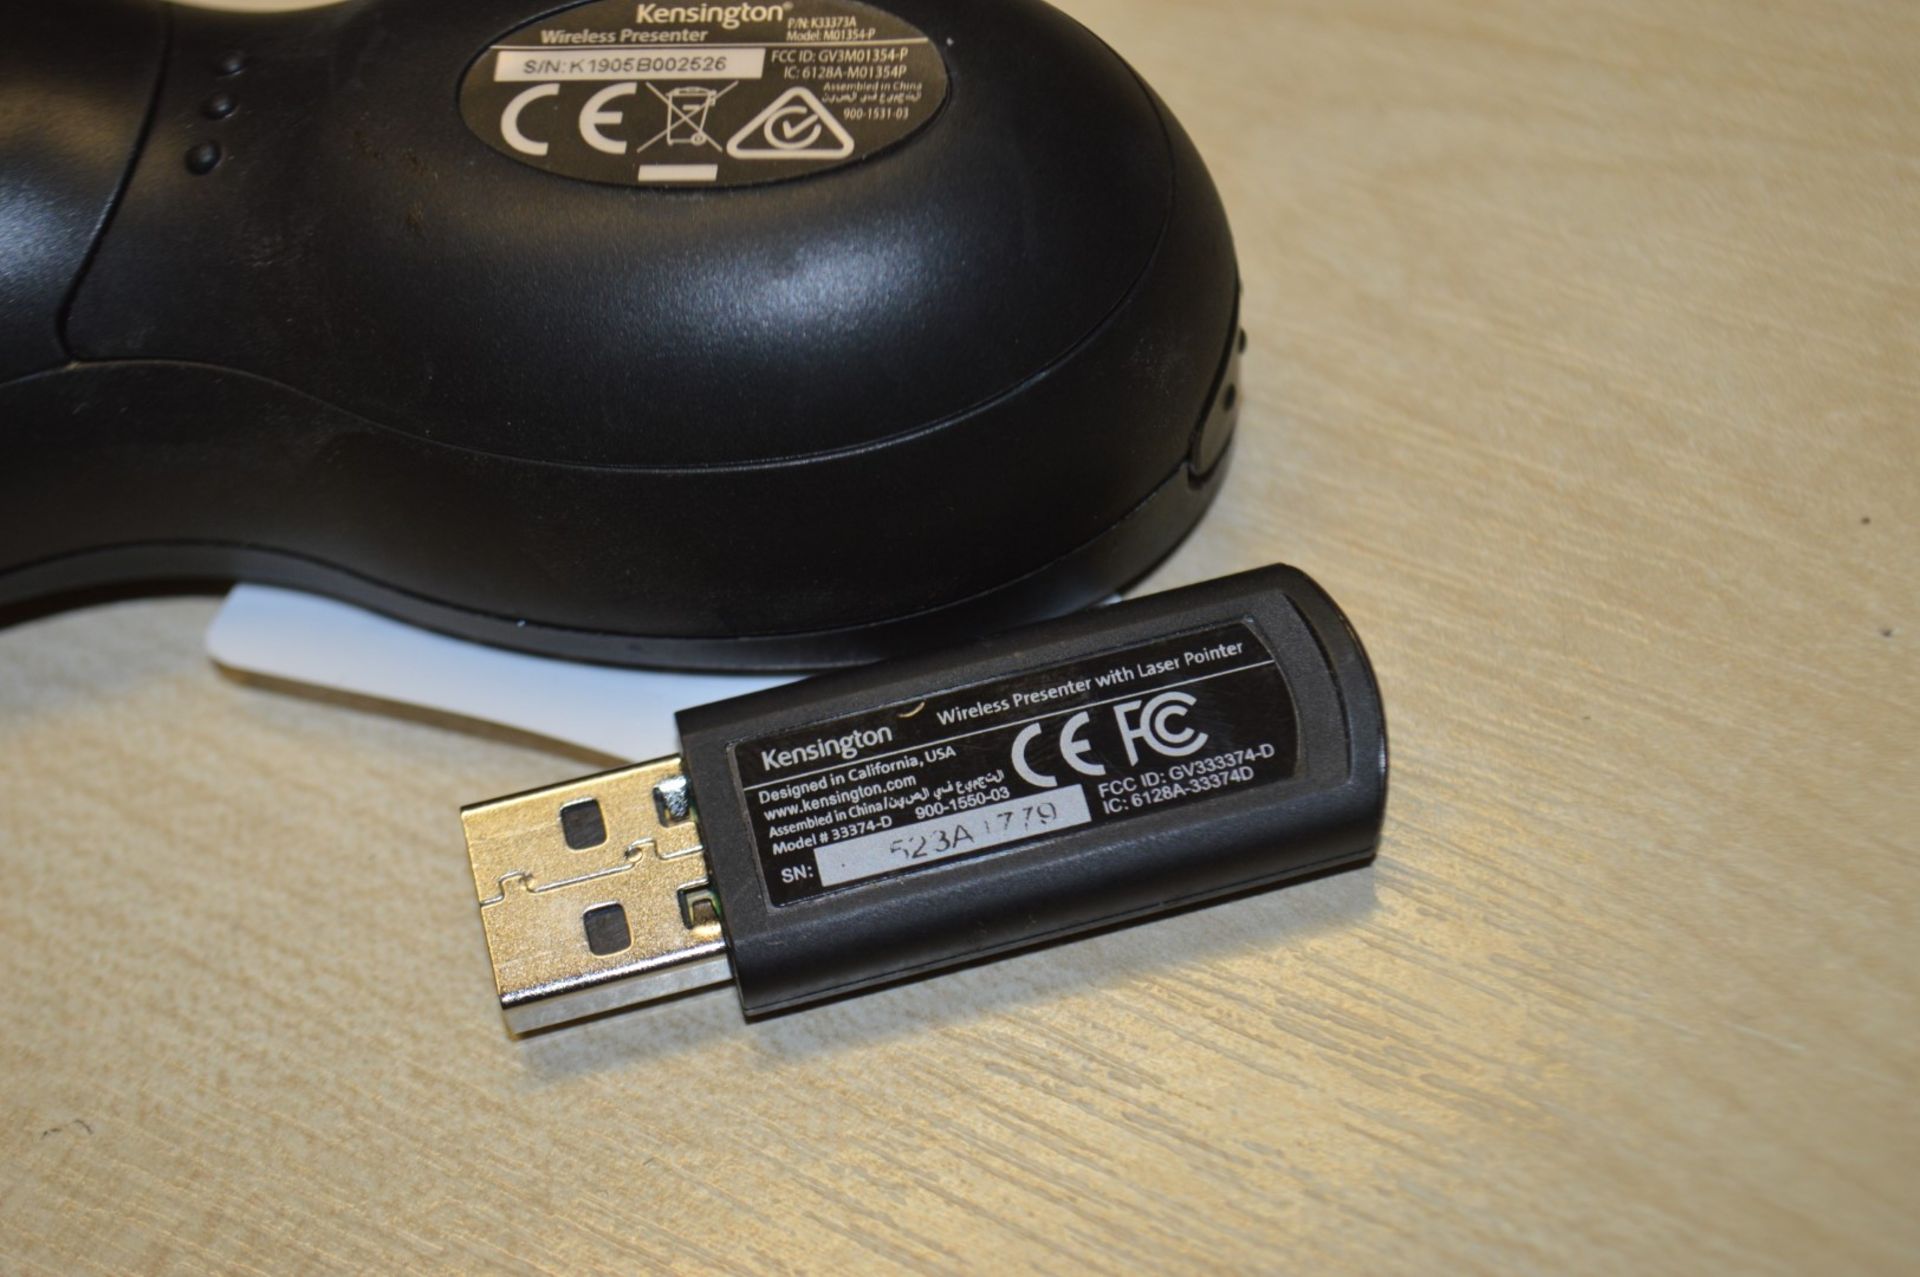 1 x Kensington Wireless Presenter Red Laser With USB Dongle - Ref: MPC822 - CL678 - Location: - Image 4 of 4